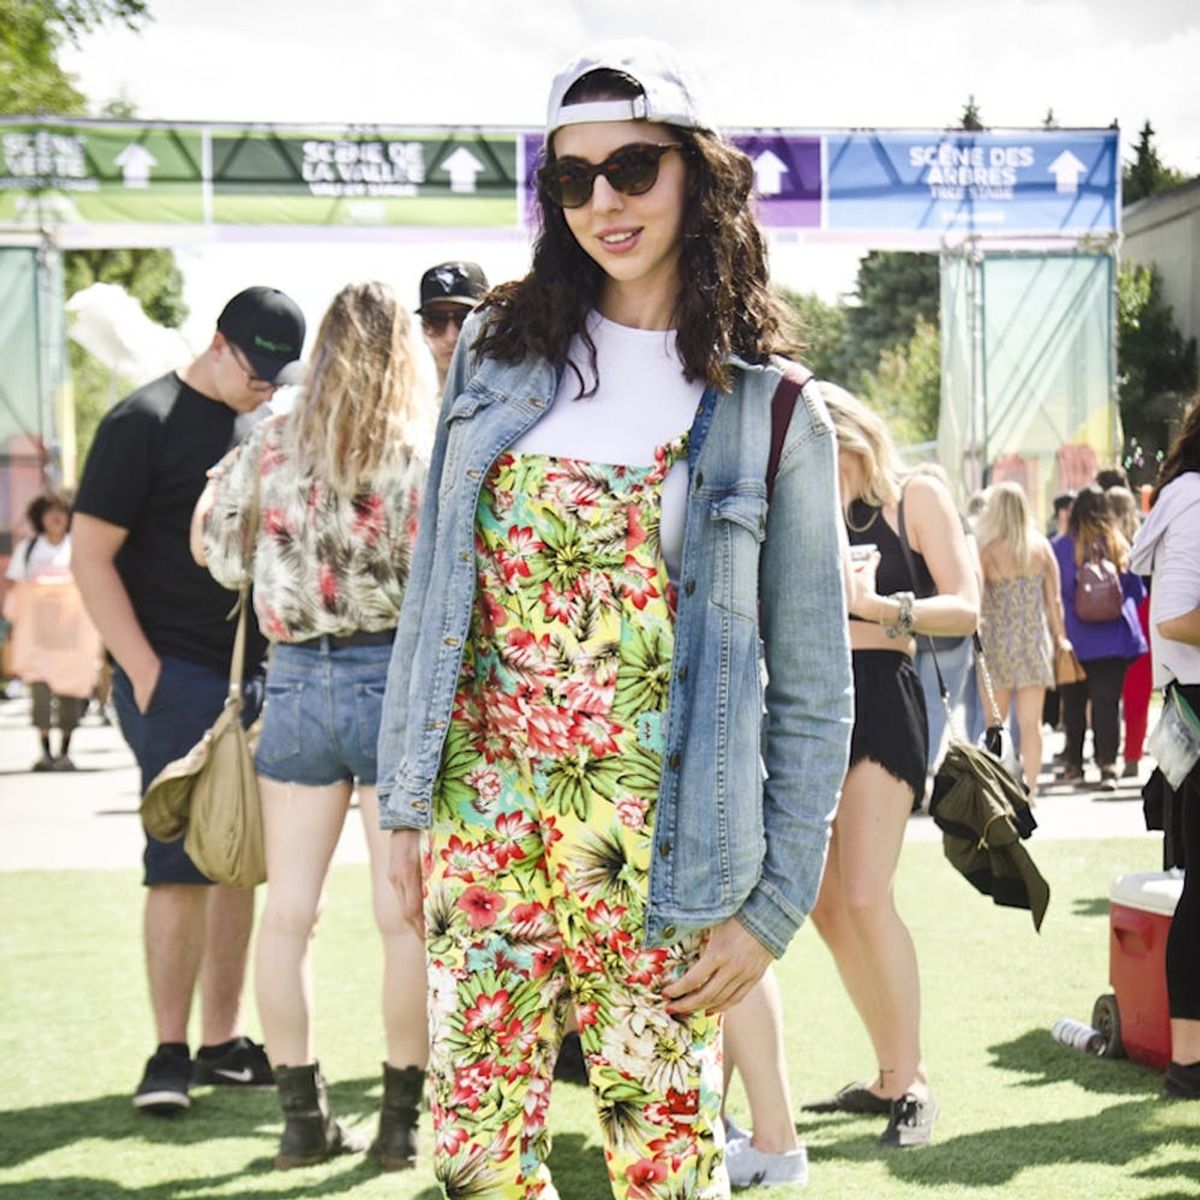 12 Statement-Making Street Styles You *Have* to See from Lollapalooza’s Canadian Sister, Osheaga 